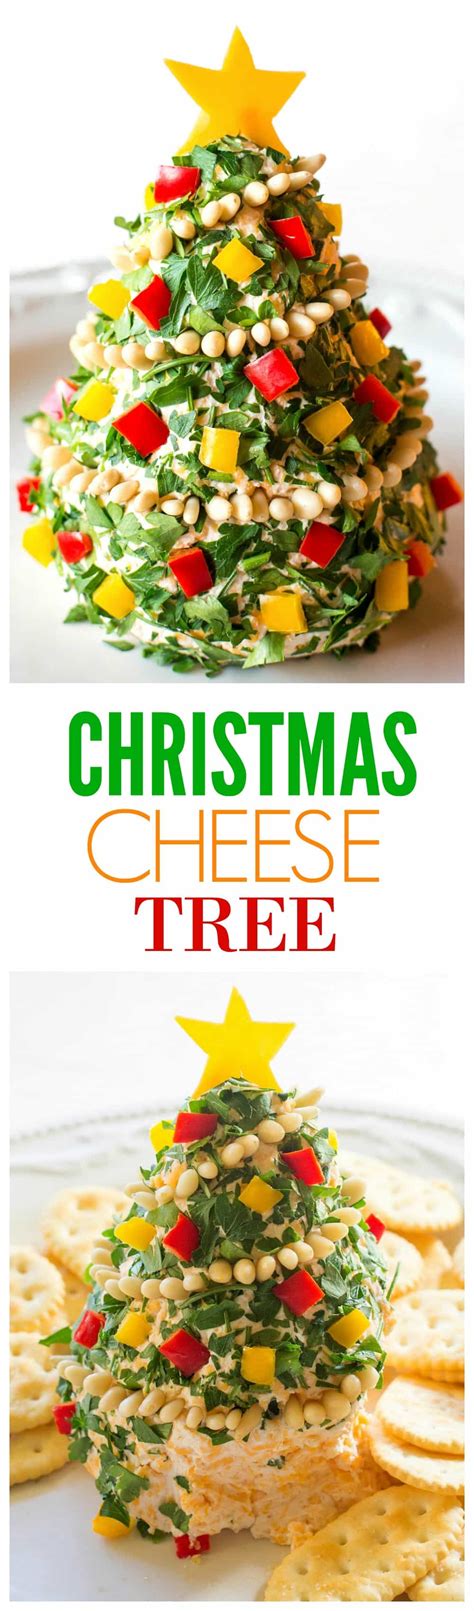 Spread goat cheese on top of bread shapes. Christmas Cheese Tree - The Girl Who Ate Everything